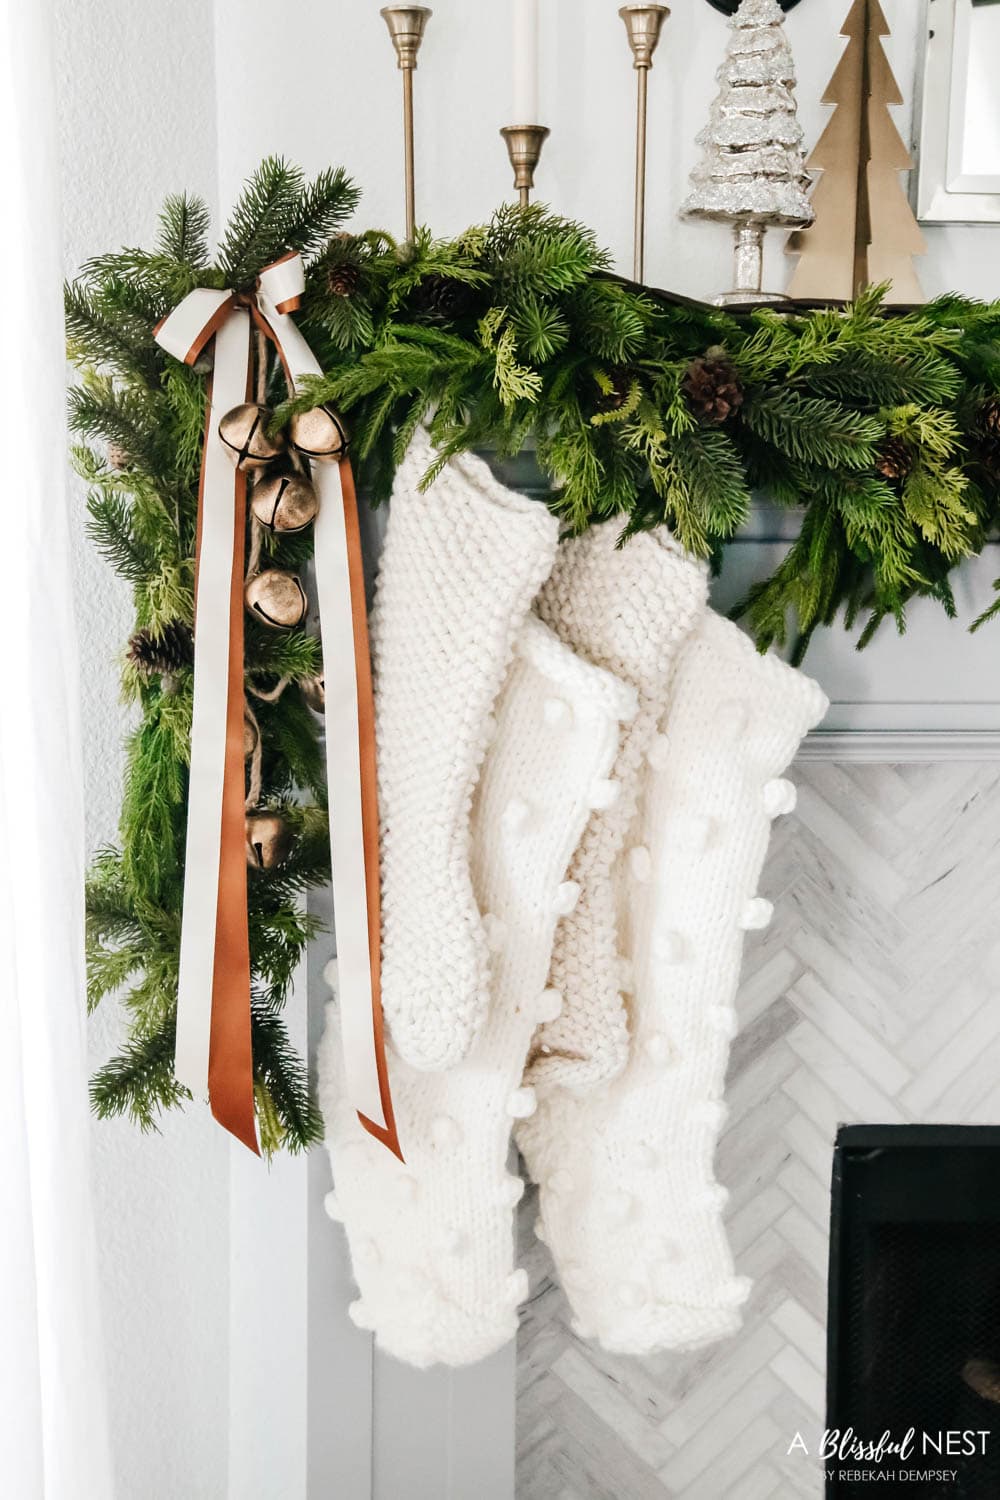 Chunky knit Christmas stockings on the side of a fireplace mantle with garland, gold bells and ribbon